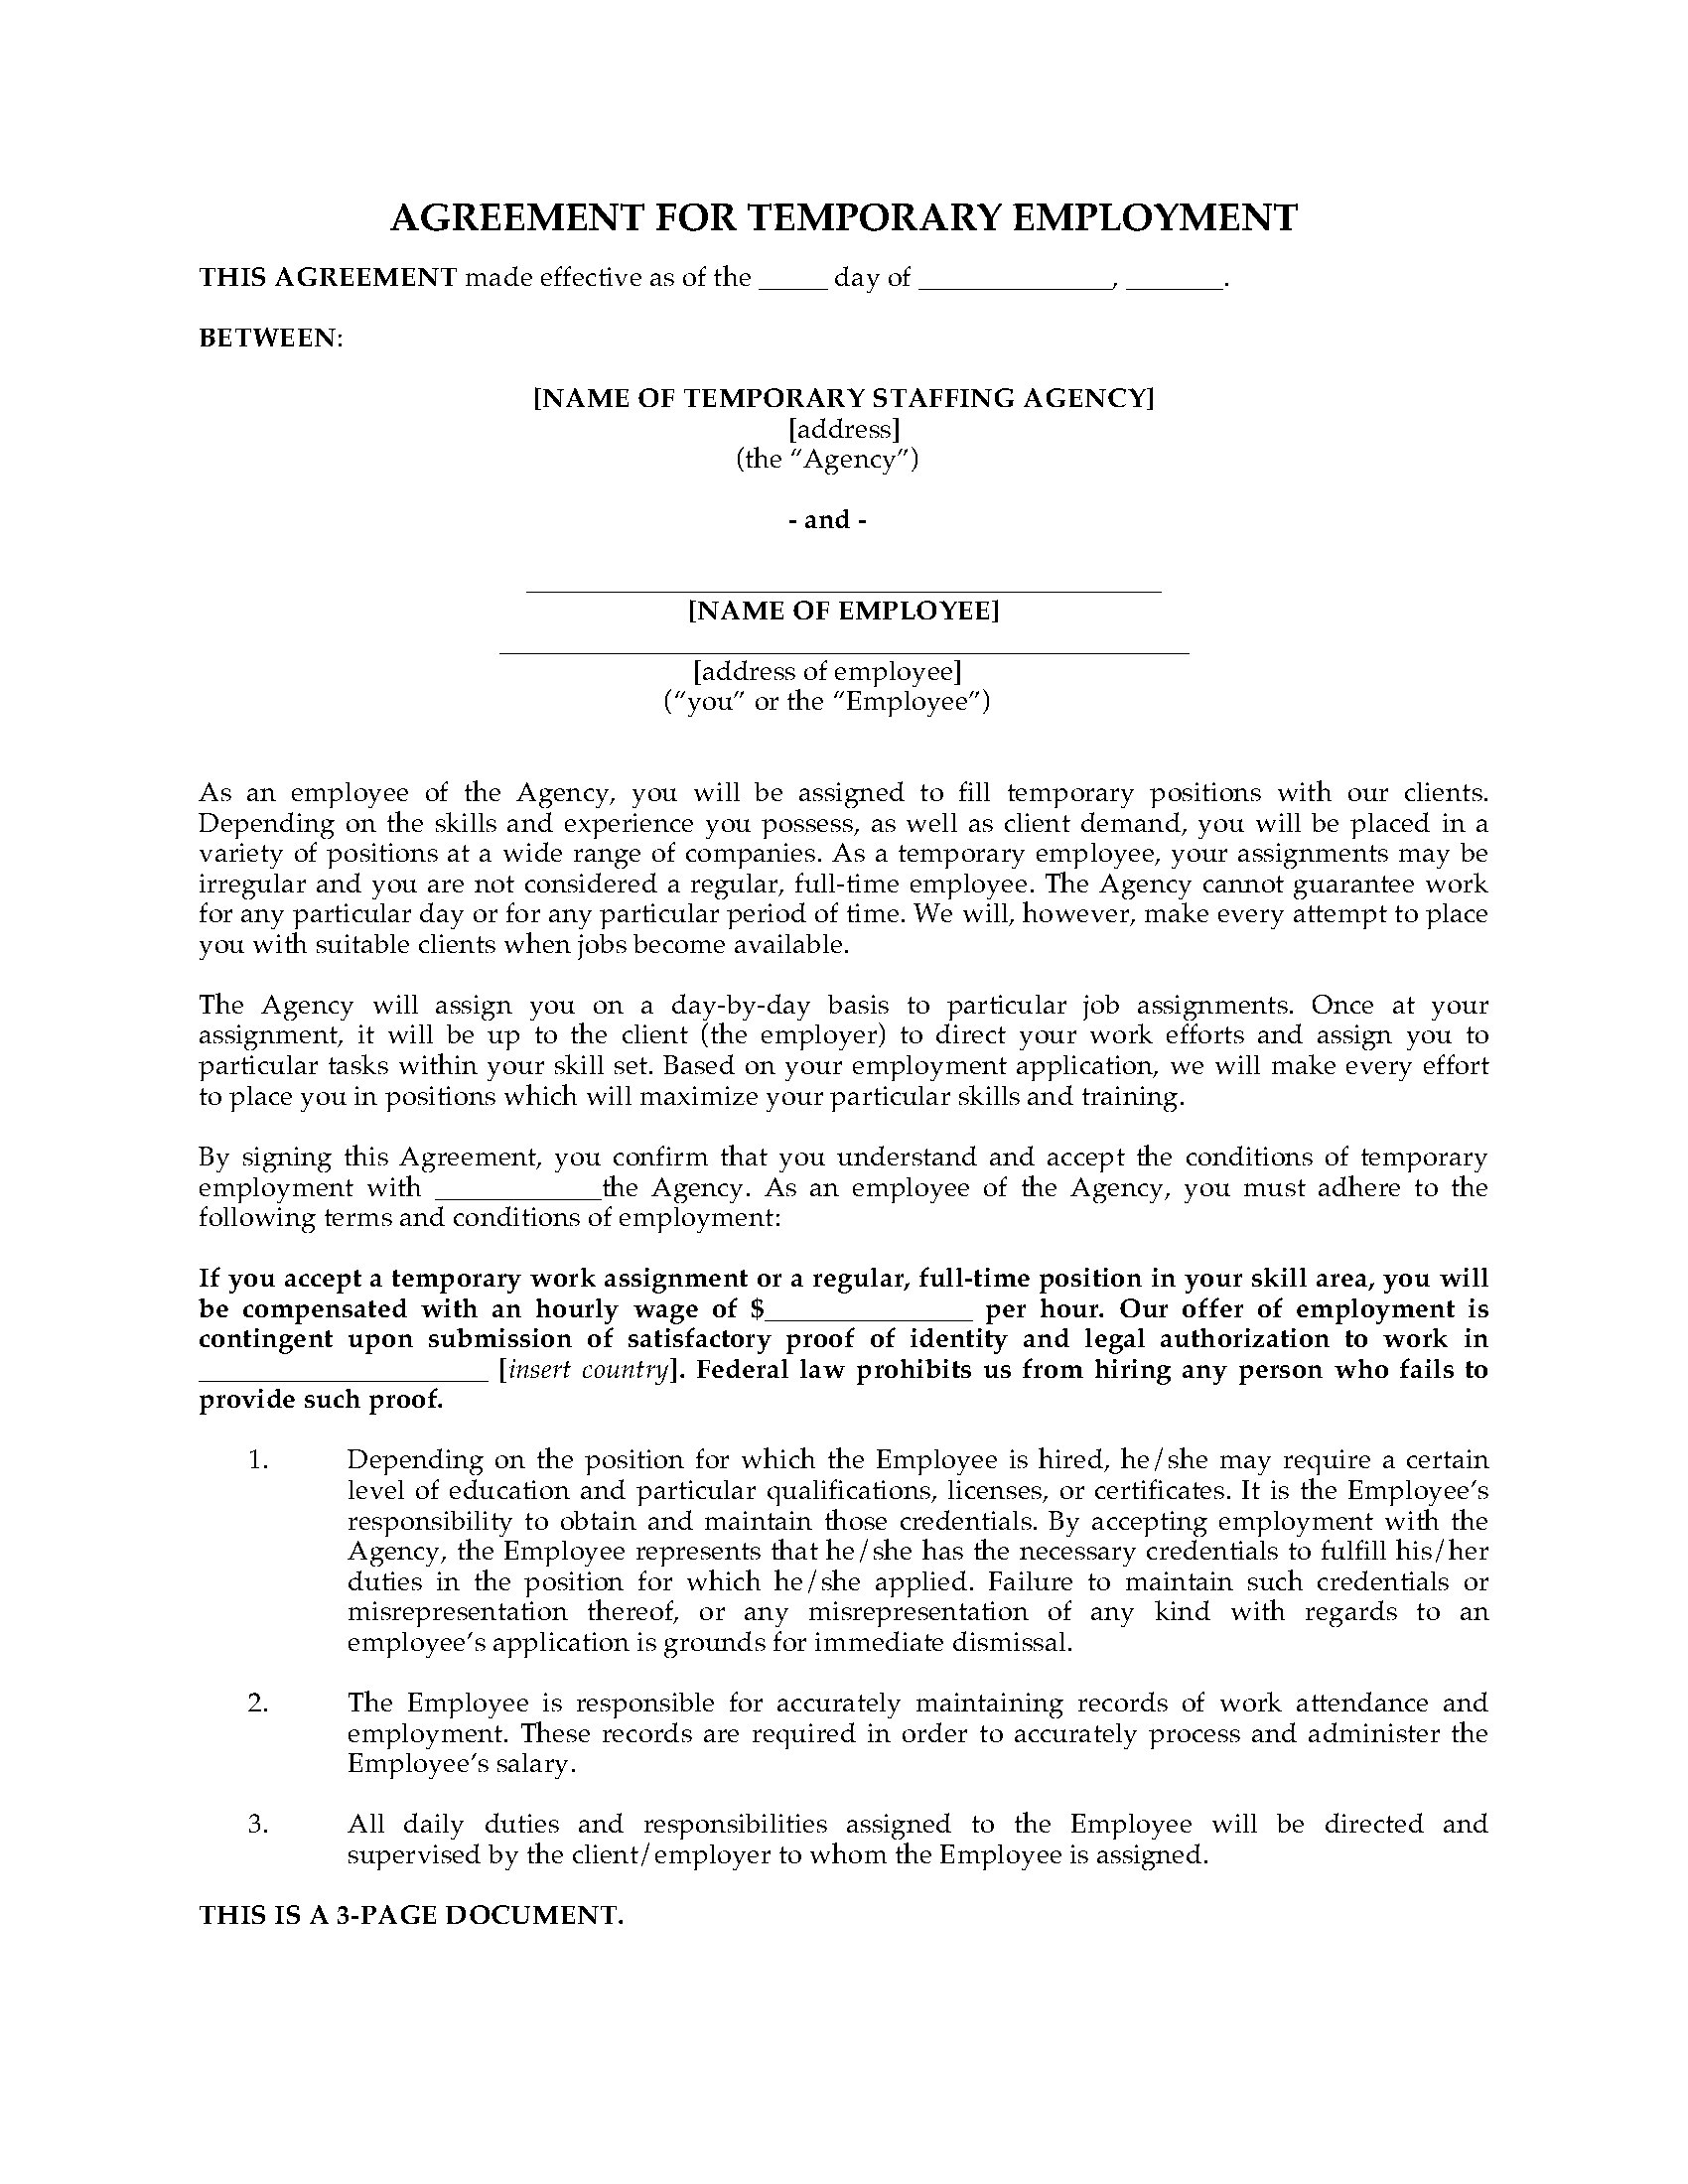 Recruitment Agency Contract Template from www.megadox.com